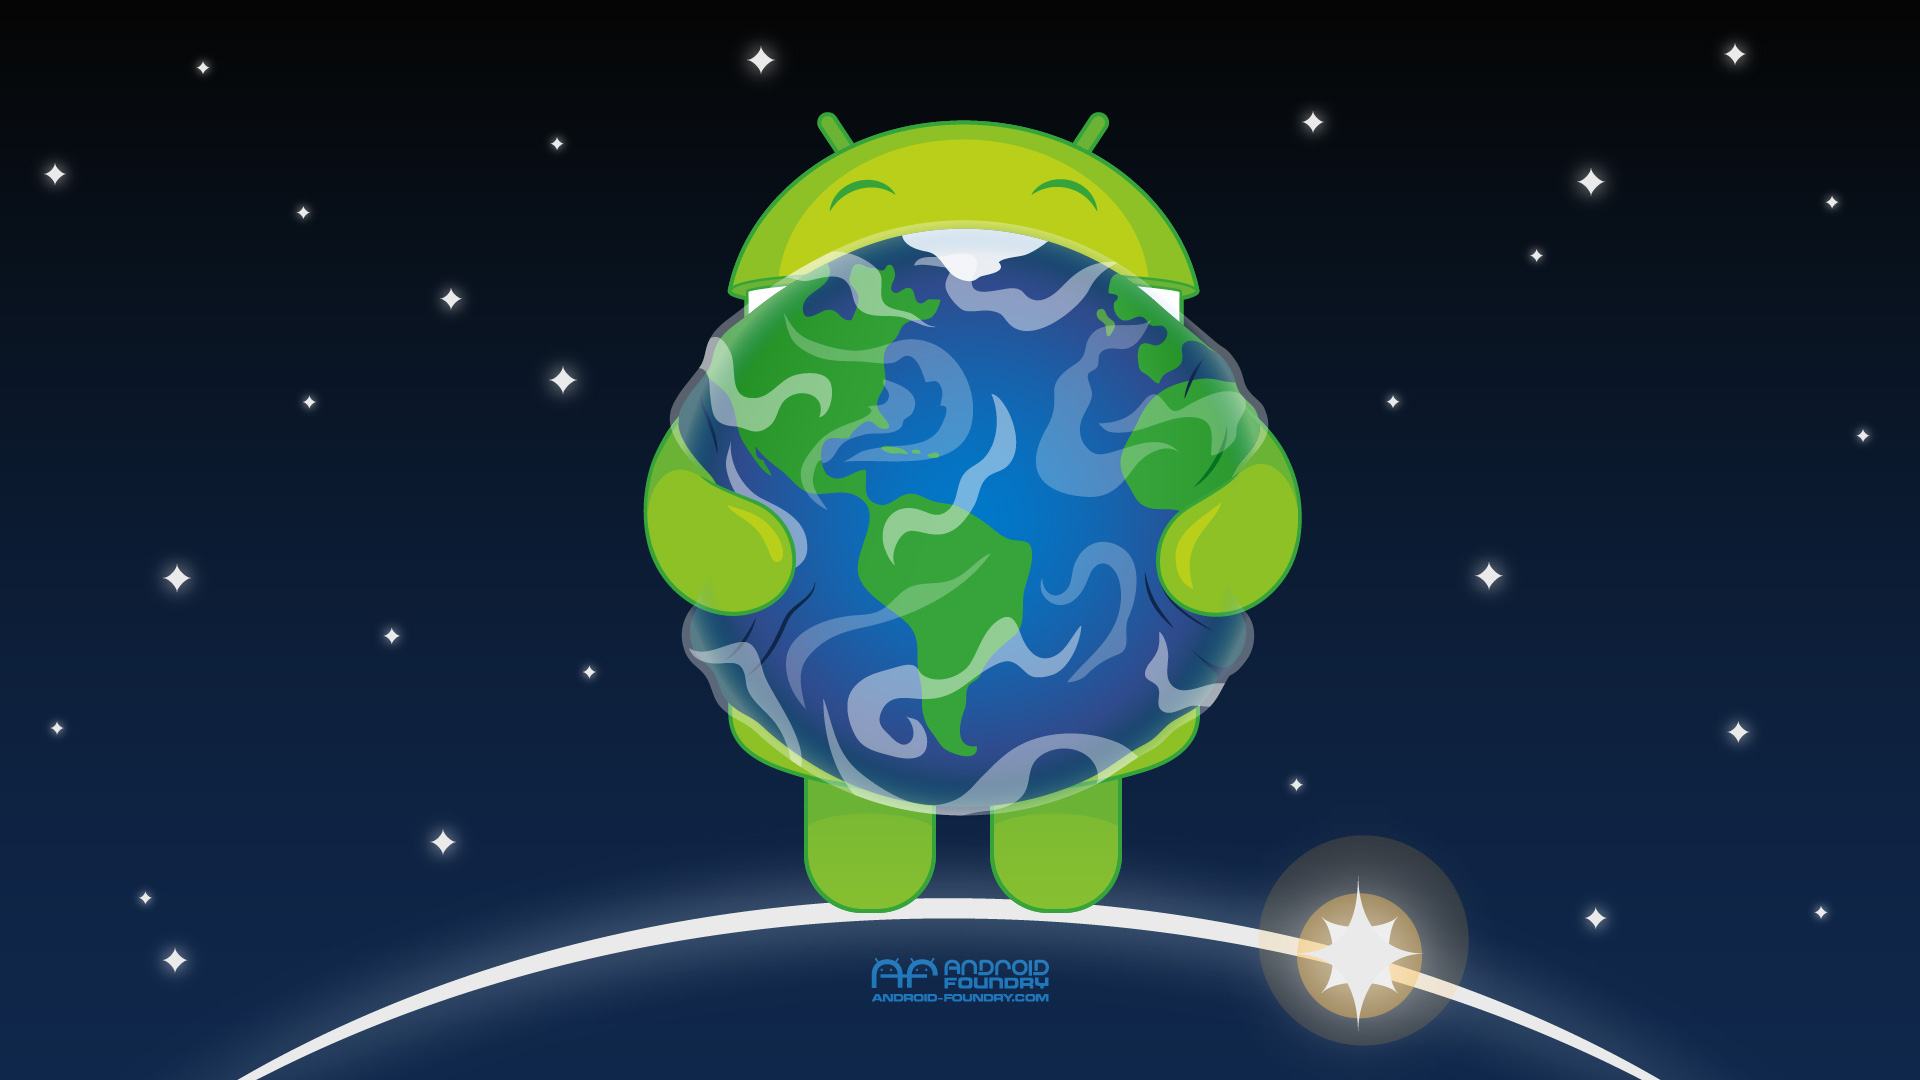 Wallpaper : Earth Day | Android Foundry